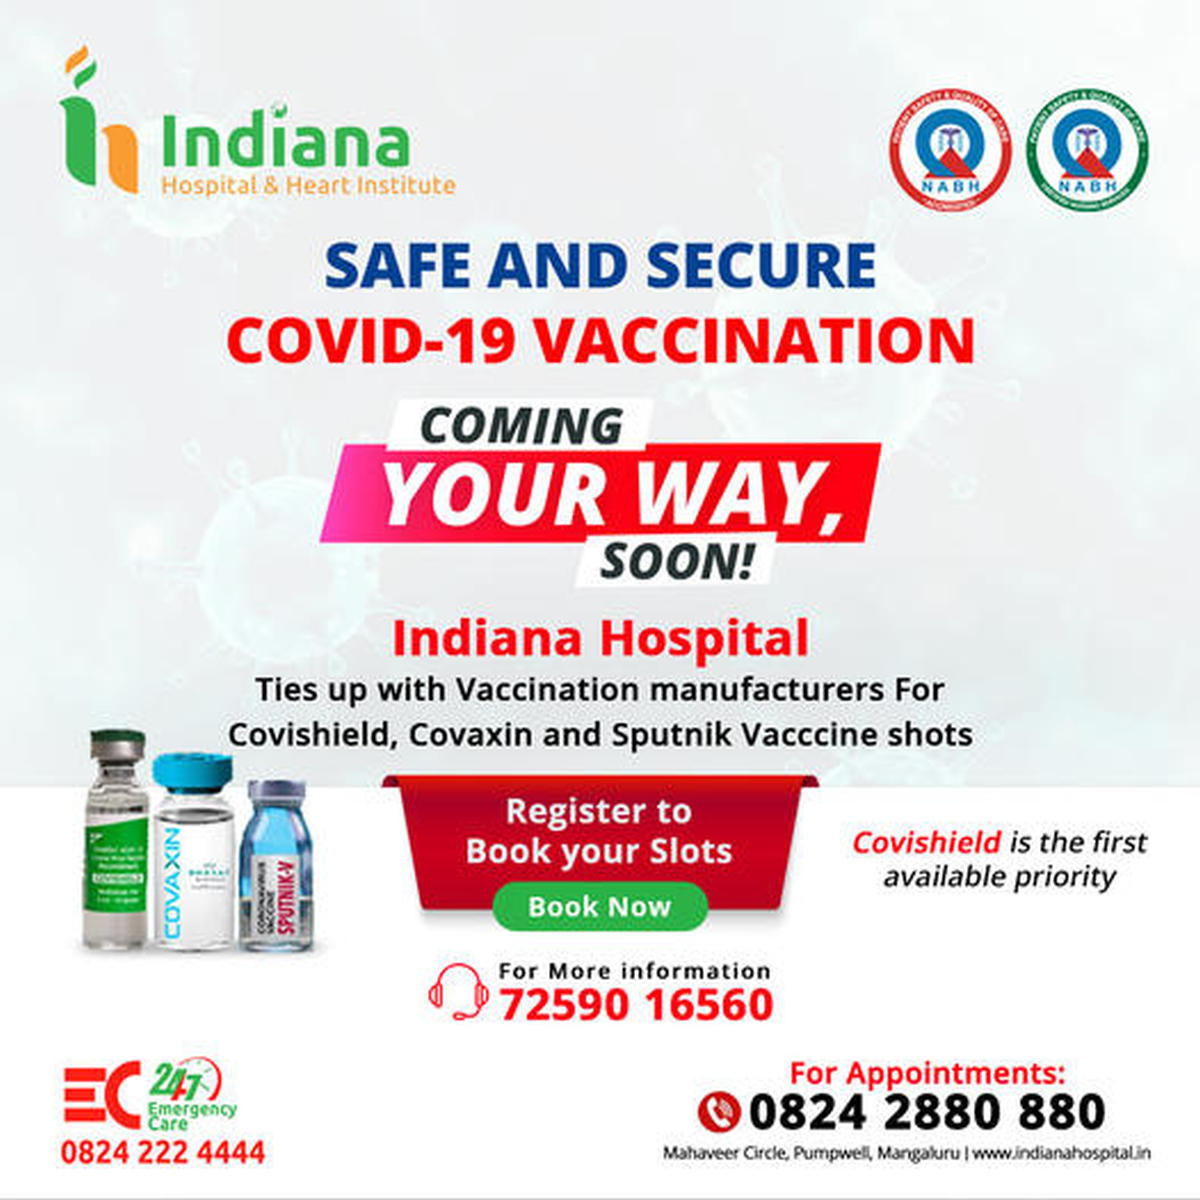 Safe and secure covid-19 vaccination at Indiana hospital